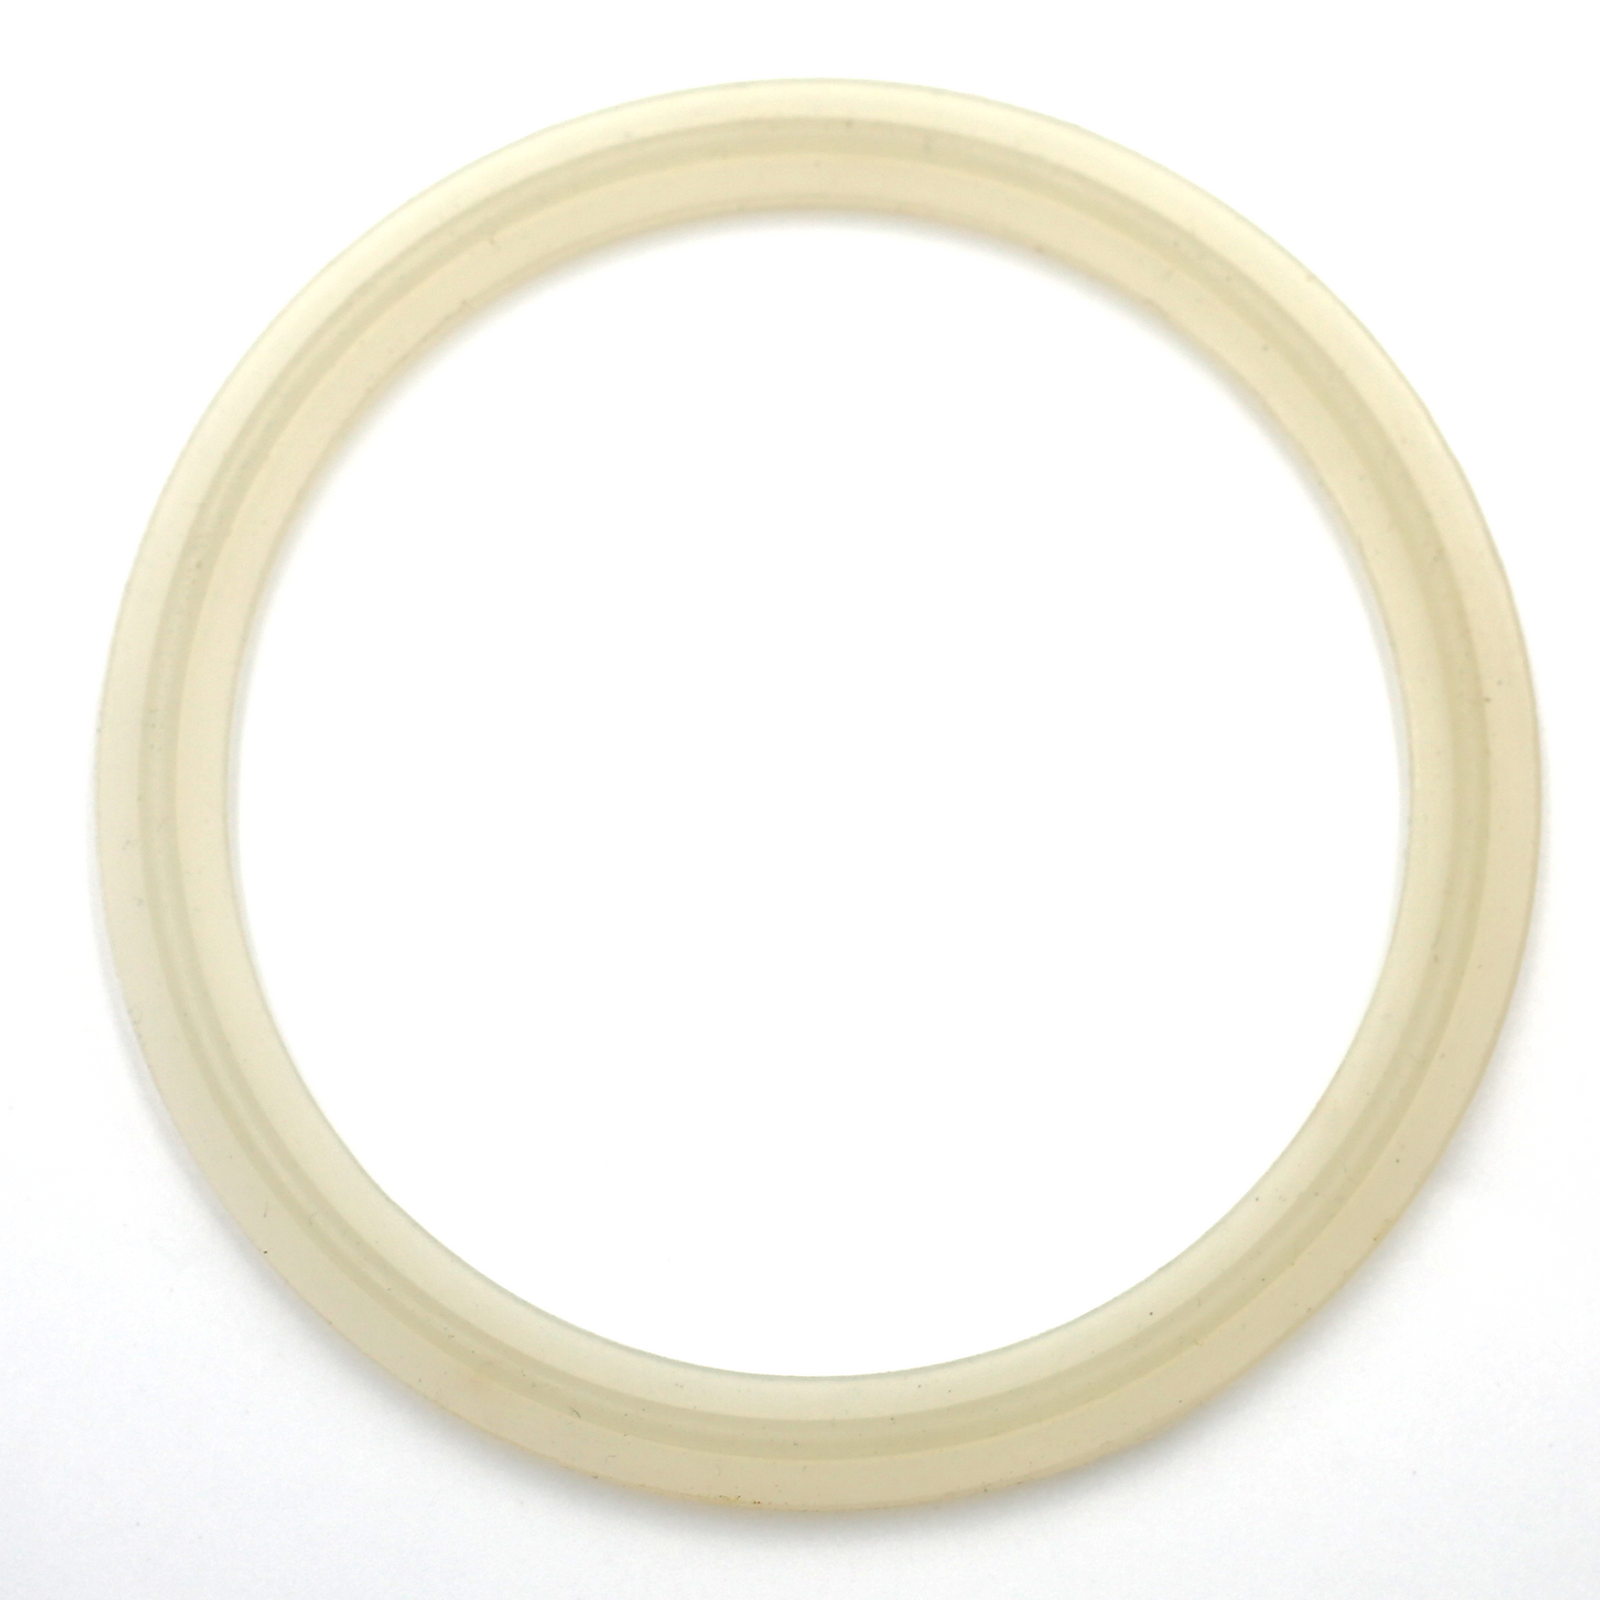 3.5 inches silicone gasket